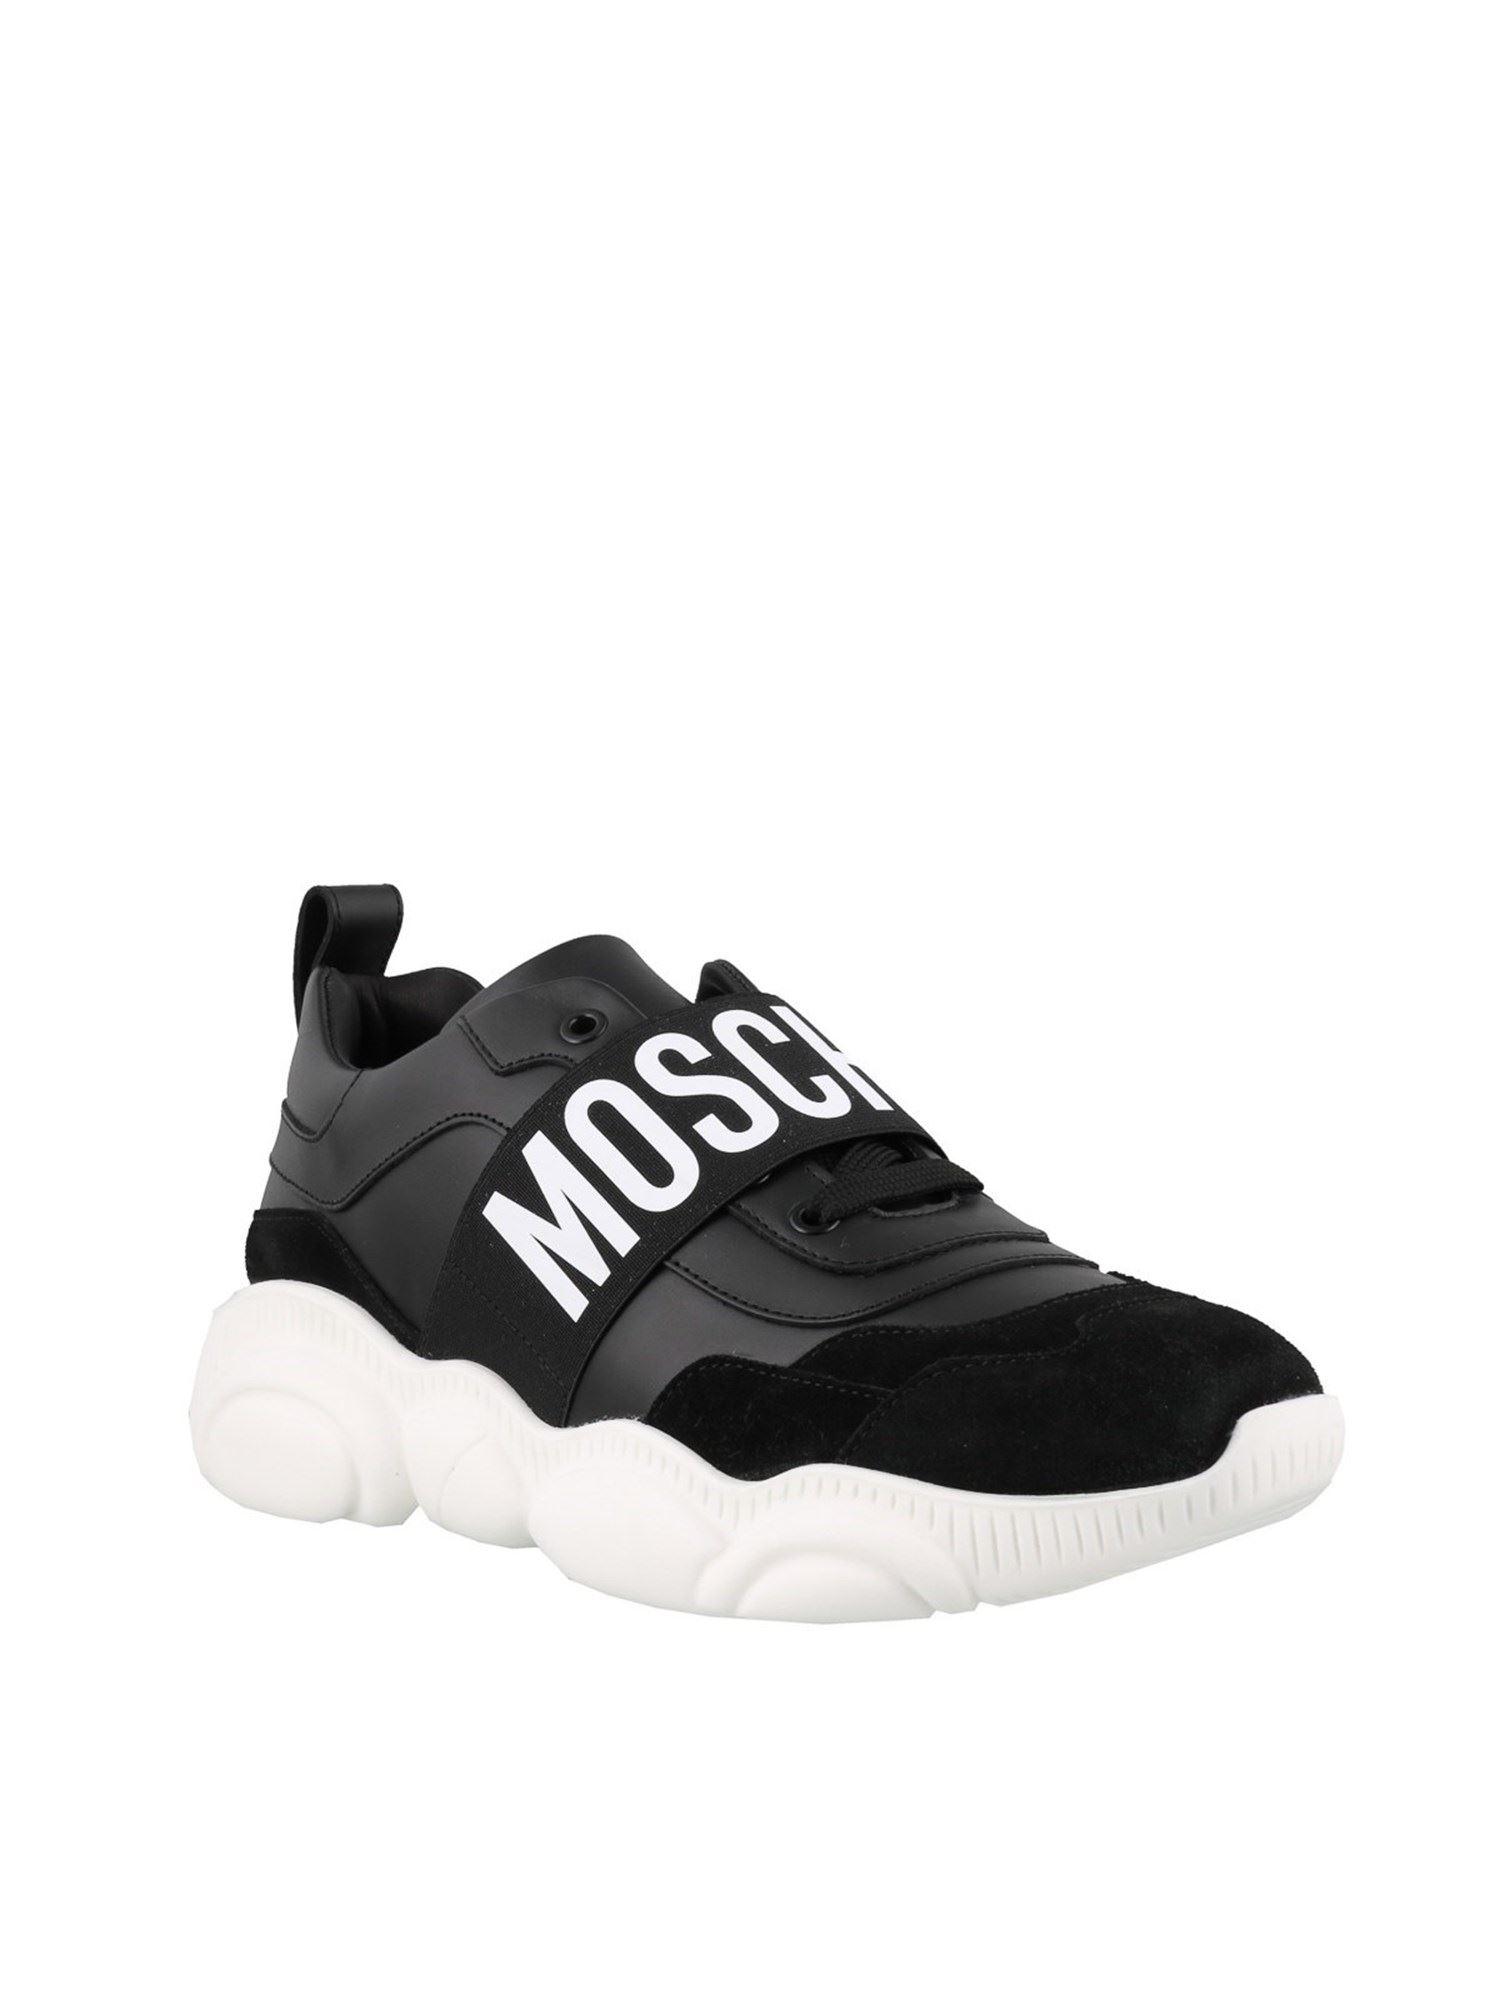 Moschino Leather Teddy Logo Stripe Sneakers in Black for Men - Lyst